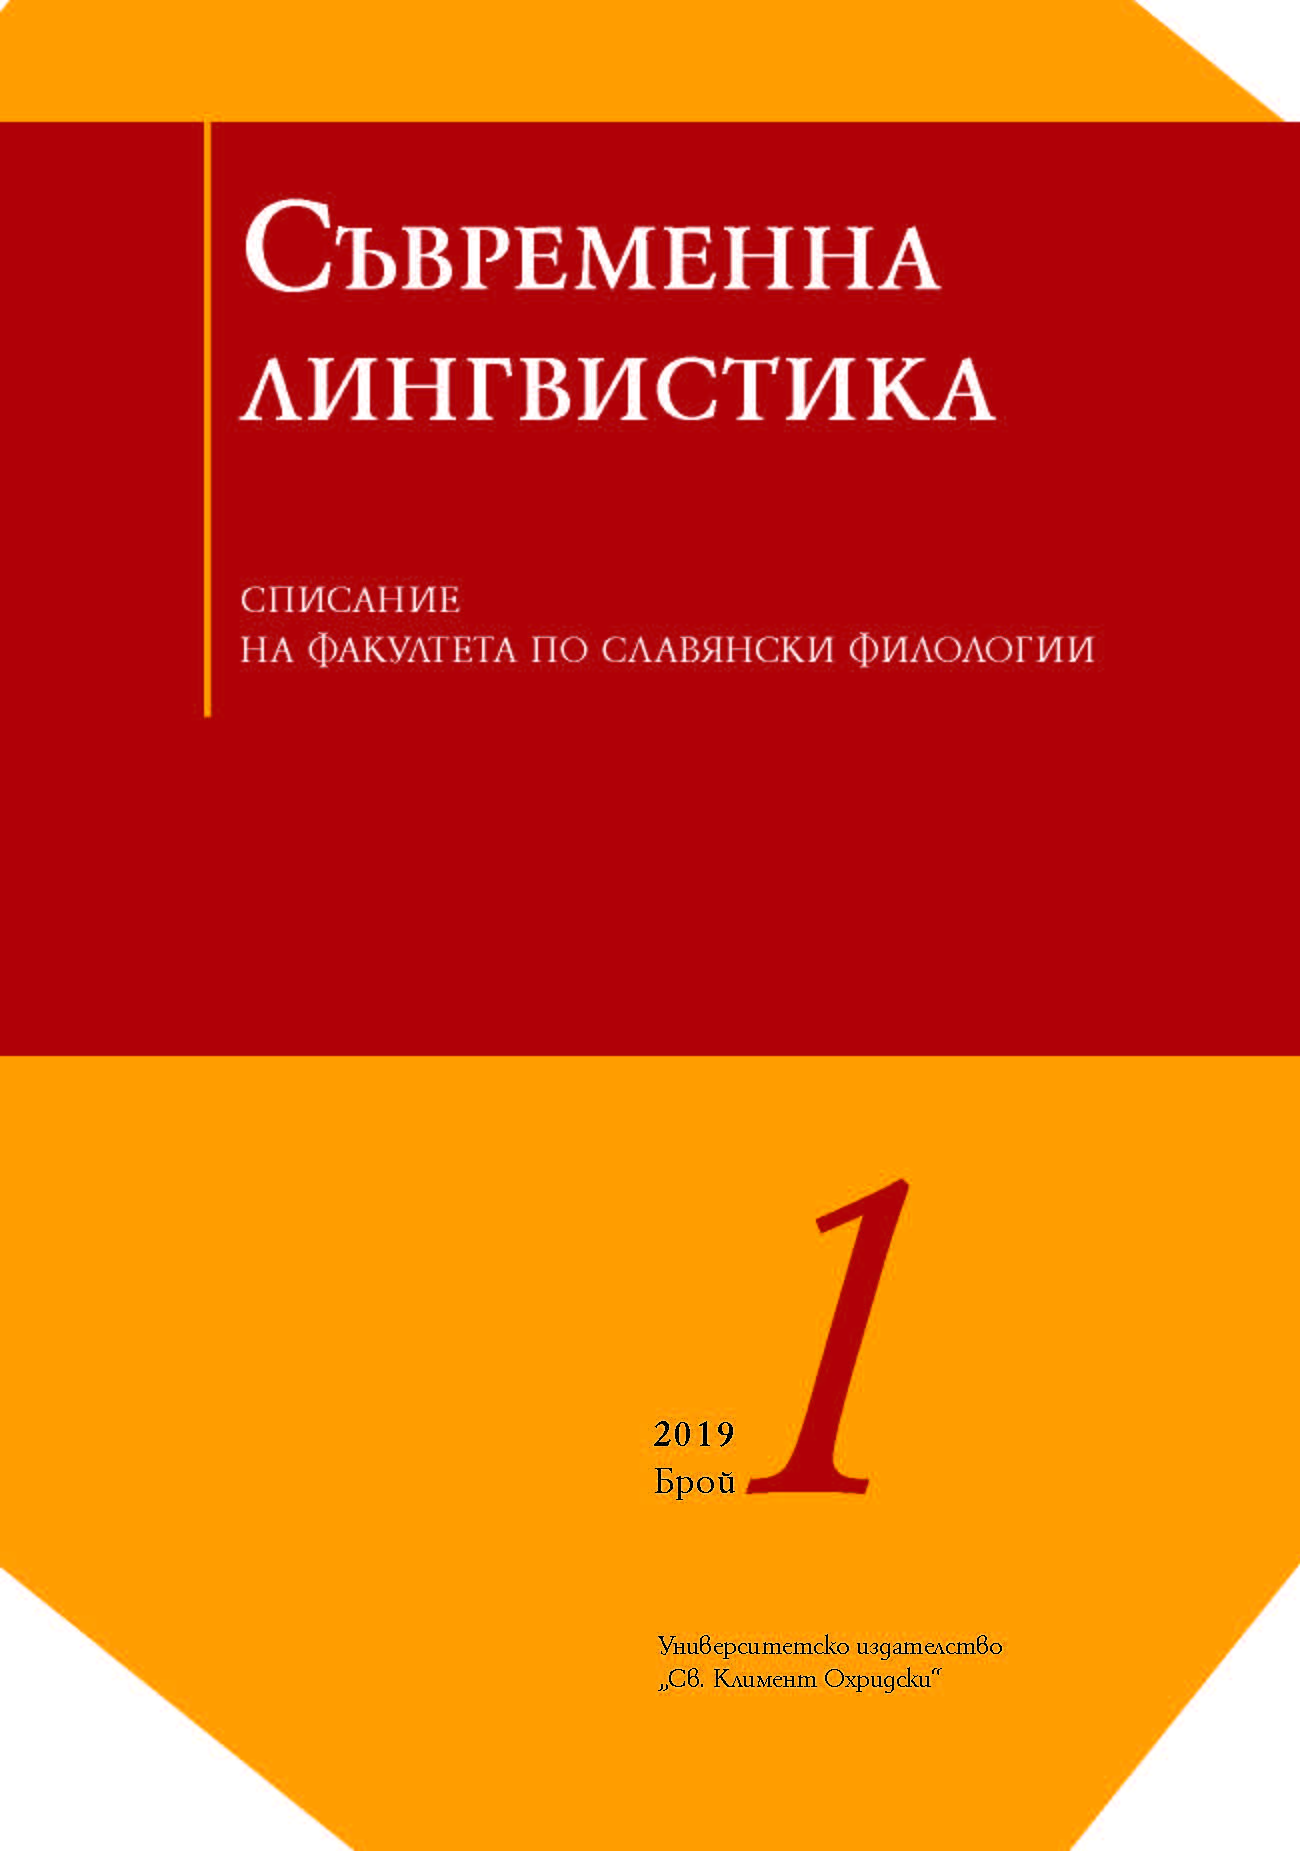 Protolinguistics and Anthropocentrism, or on Non-Linguistic Consciousness. About the book of M. Georgieva On the Extra-linguistic Nature of Emotive Interjections. Protolinguistics and Comminication. University Press “Saint Kliment Ohridski”, S. 2010. Cover Image